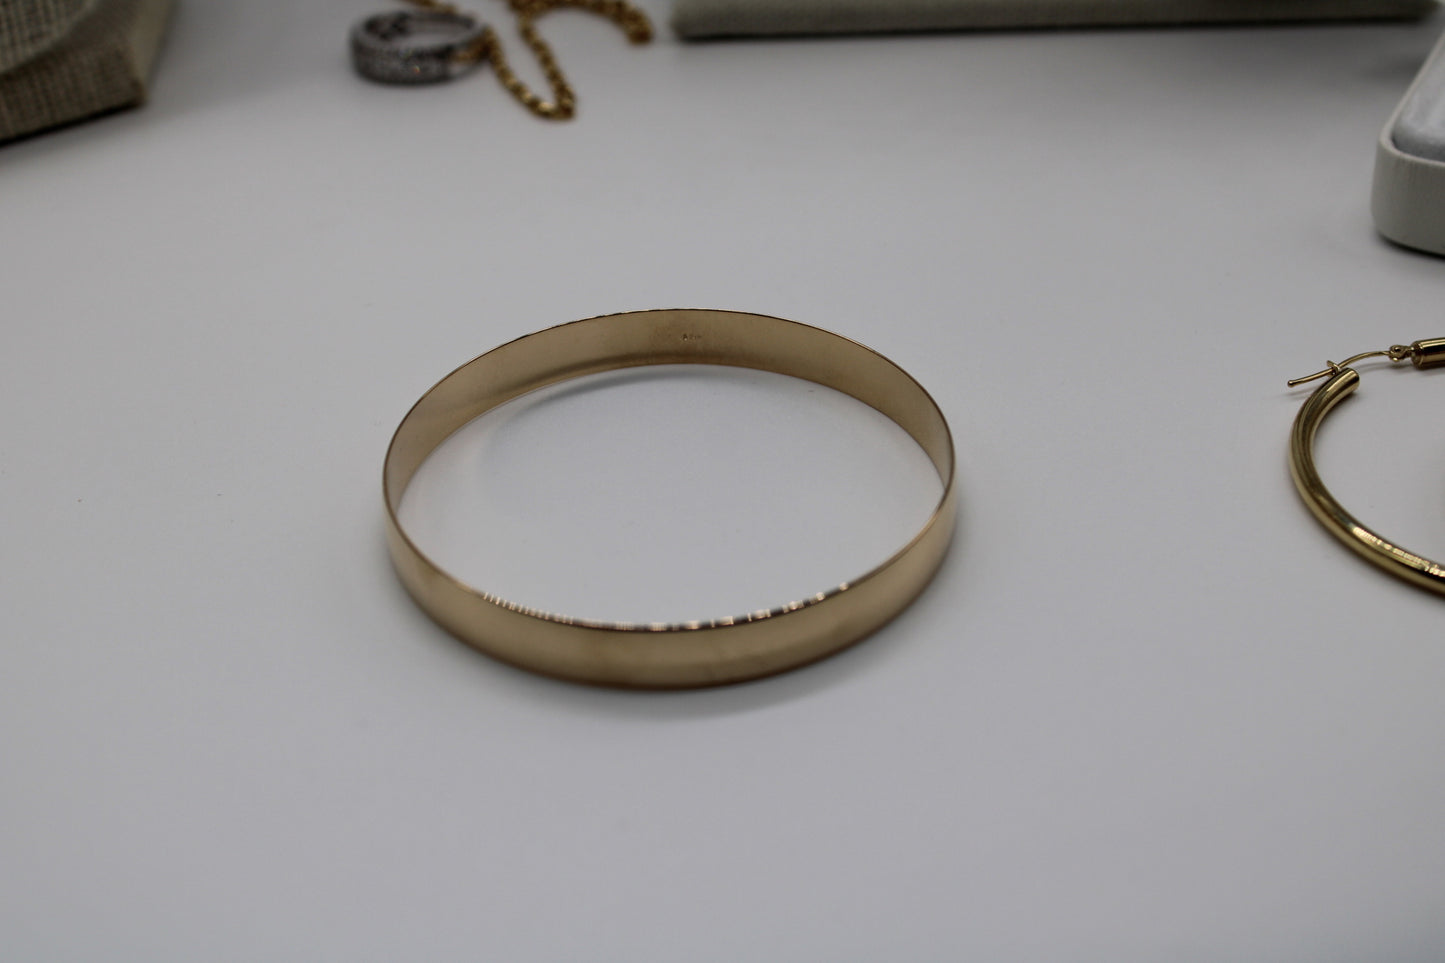 14k Yellow Gold 8mm Slip On Round Bangle, from 302 Fine Jewelry Collection